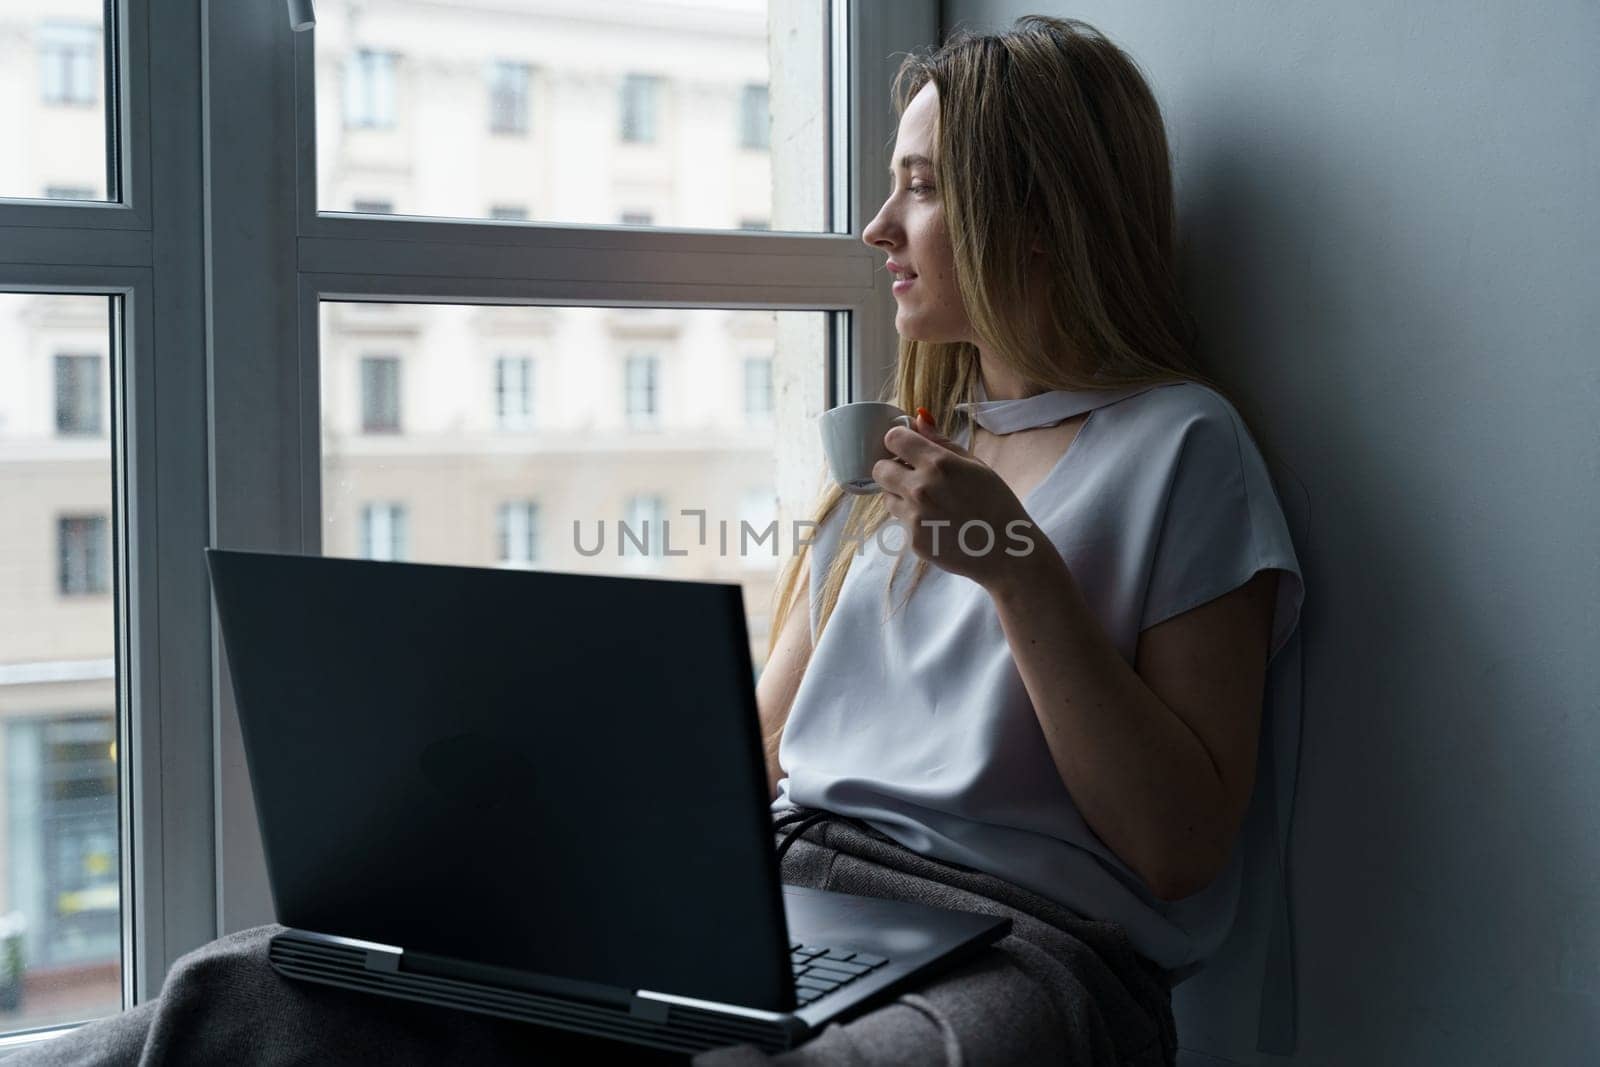 A young woman sits on a windowsill, drinks coffee, works at a laptop, looks out the window. by Sd28DimoN_1976